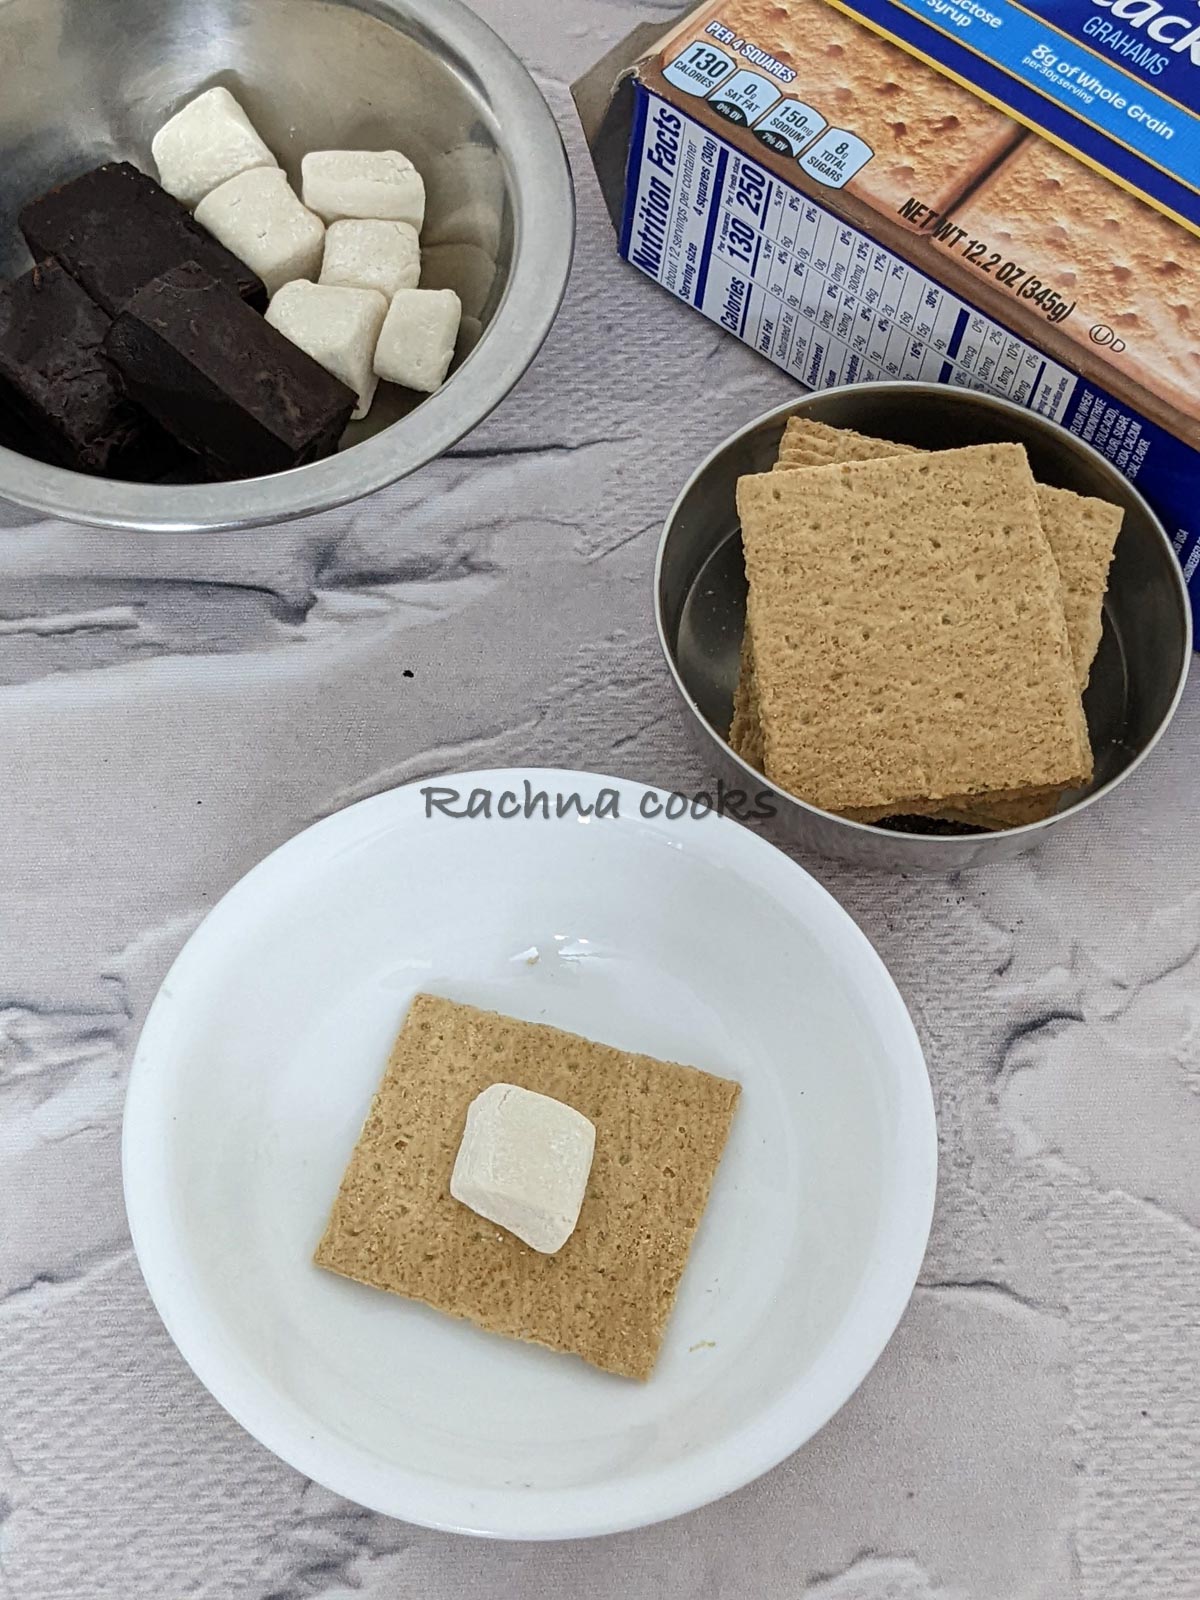 Graham's cracker with a pressed marshmallow on top.  Bowls of crackers, marshmallows and chocolate bars visible in the background.